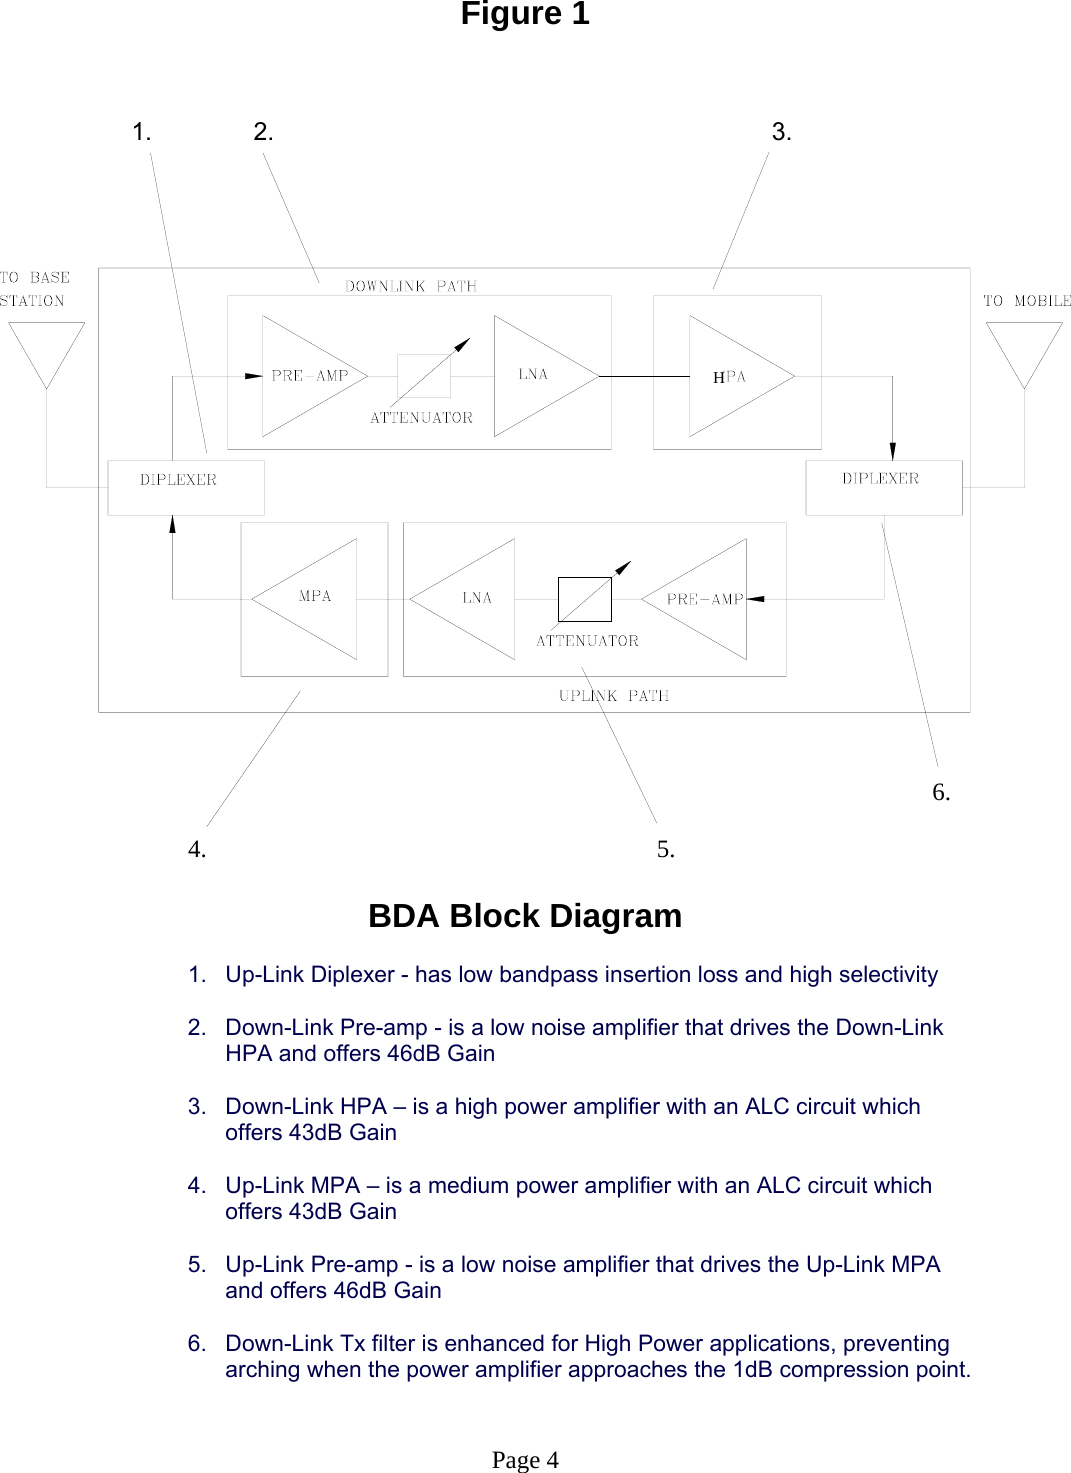 Figure 1             1.      2.                 3.                                   6.                              4.                     5.  BDA Block Diagram  1.  Up-Link Diplexer - has low bandpass insertion loss and high selectivity   2.  Down-Link Pre-amp - is a low noise amplifier that drives the Down-Link HPA and offers 46dB Gain  3.  Down-Link HPA – is a high power amplifier with an ALC circuit which offers 43dB Gain  4.  Up-Link MPA – is a medium power amplifier with an ALC circuit which offers 43dB Gain  5.  Up-Link Pre-amp - is a low noise amplifier that drives the Up-Link MPA  and offers 46dB Gain  6.  Down-Link Tx filter is enhanced for High Power applications, preventing arching when the power amplifier approaches the 1dB compression point.   Page 4 H